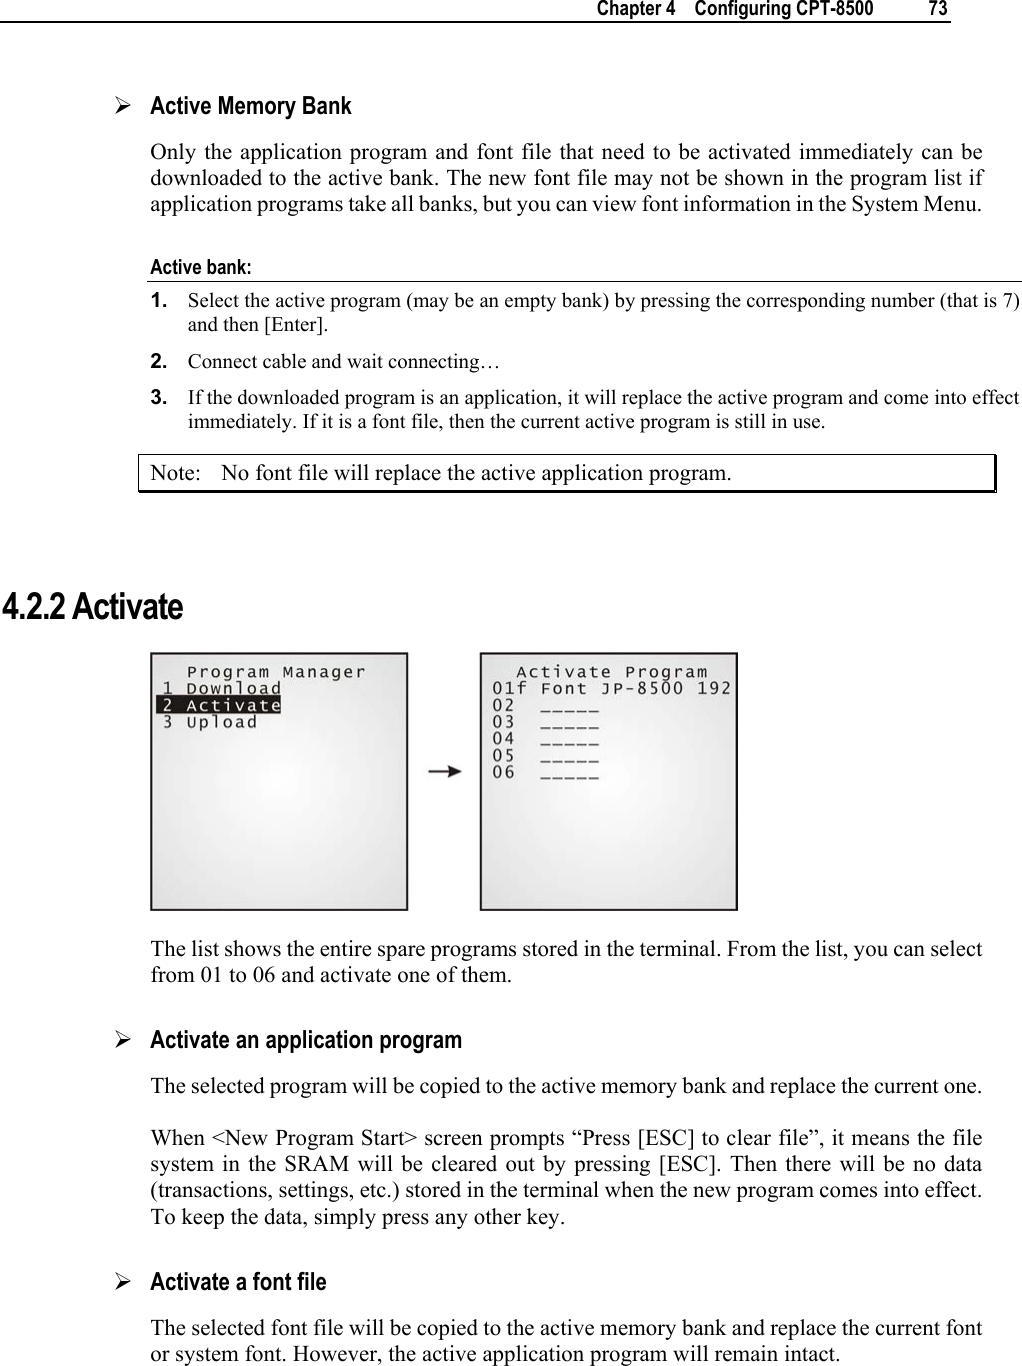    Chapter 4    Configuring CPT-8500  73  ¾ Active Memory Bank Only the application program and font file that need to be activated immediately can be downloaded to the active bank. The new font file may not be shown in the program list if application programs take all banks, but you can view font information in the System Menu. Active bank: 1.  Select the active program (may be an empty bank) by pressing the corresponding number (that is 7) and then [Enter].  2.  Connect cable and wait connecting…  3.  If the downloaded program is an application, it will replace the active program and come into effect immediately. If it is a font file, then the current active program is still in use. Note:  No font file will replace the active application program.   4.2.2 Activate  The list shows the entire spare programs stored in the terminal. From the list, you can select from 01 to 06 and activate one of them.  ¾ Activate an application program The selected program will be copied to the active memory bank and replace the current one. When &lt;New Program Start&gt; screen prompts “Press [ESC] to clear file”, it means the file system in the SRAM will be cleared out by pressing [ESC]. Then there will be no data (transactions, settings, etc.) stored in the terminal when the new program comes into effect. To keep the data, simply press any other key. ¾ Activate a font file The selected font file will be copied to the active memory bank and replace the current font or system font. However, the active application program will remain intact.  